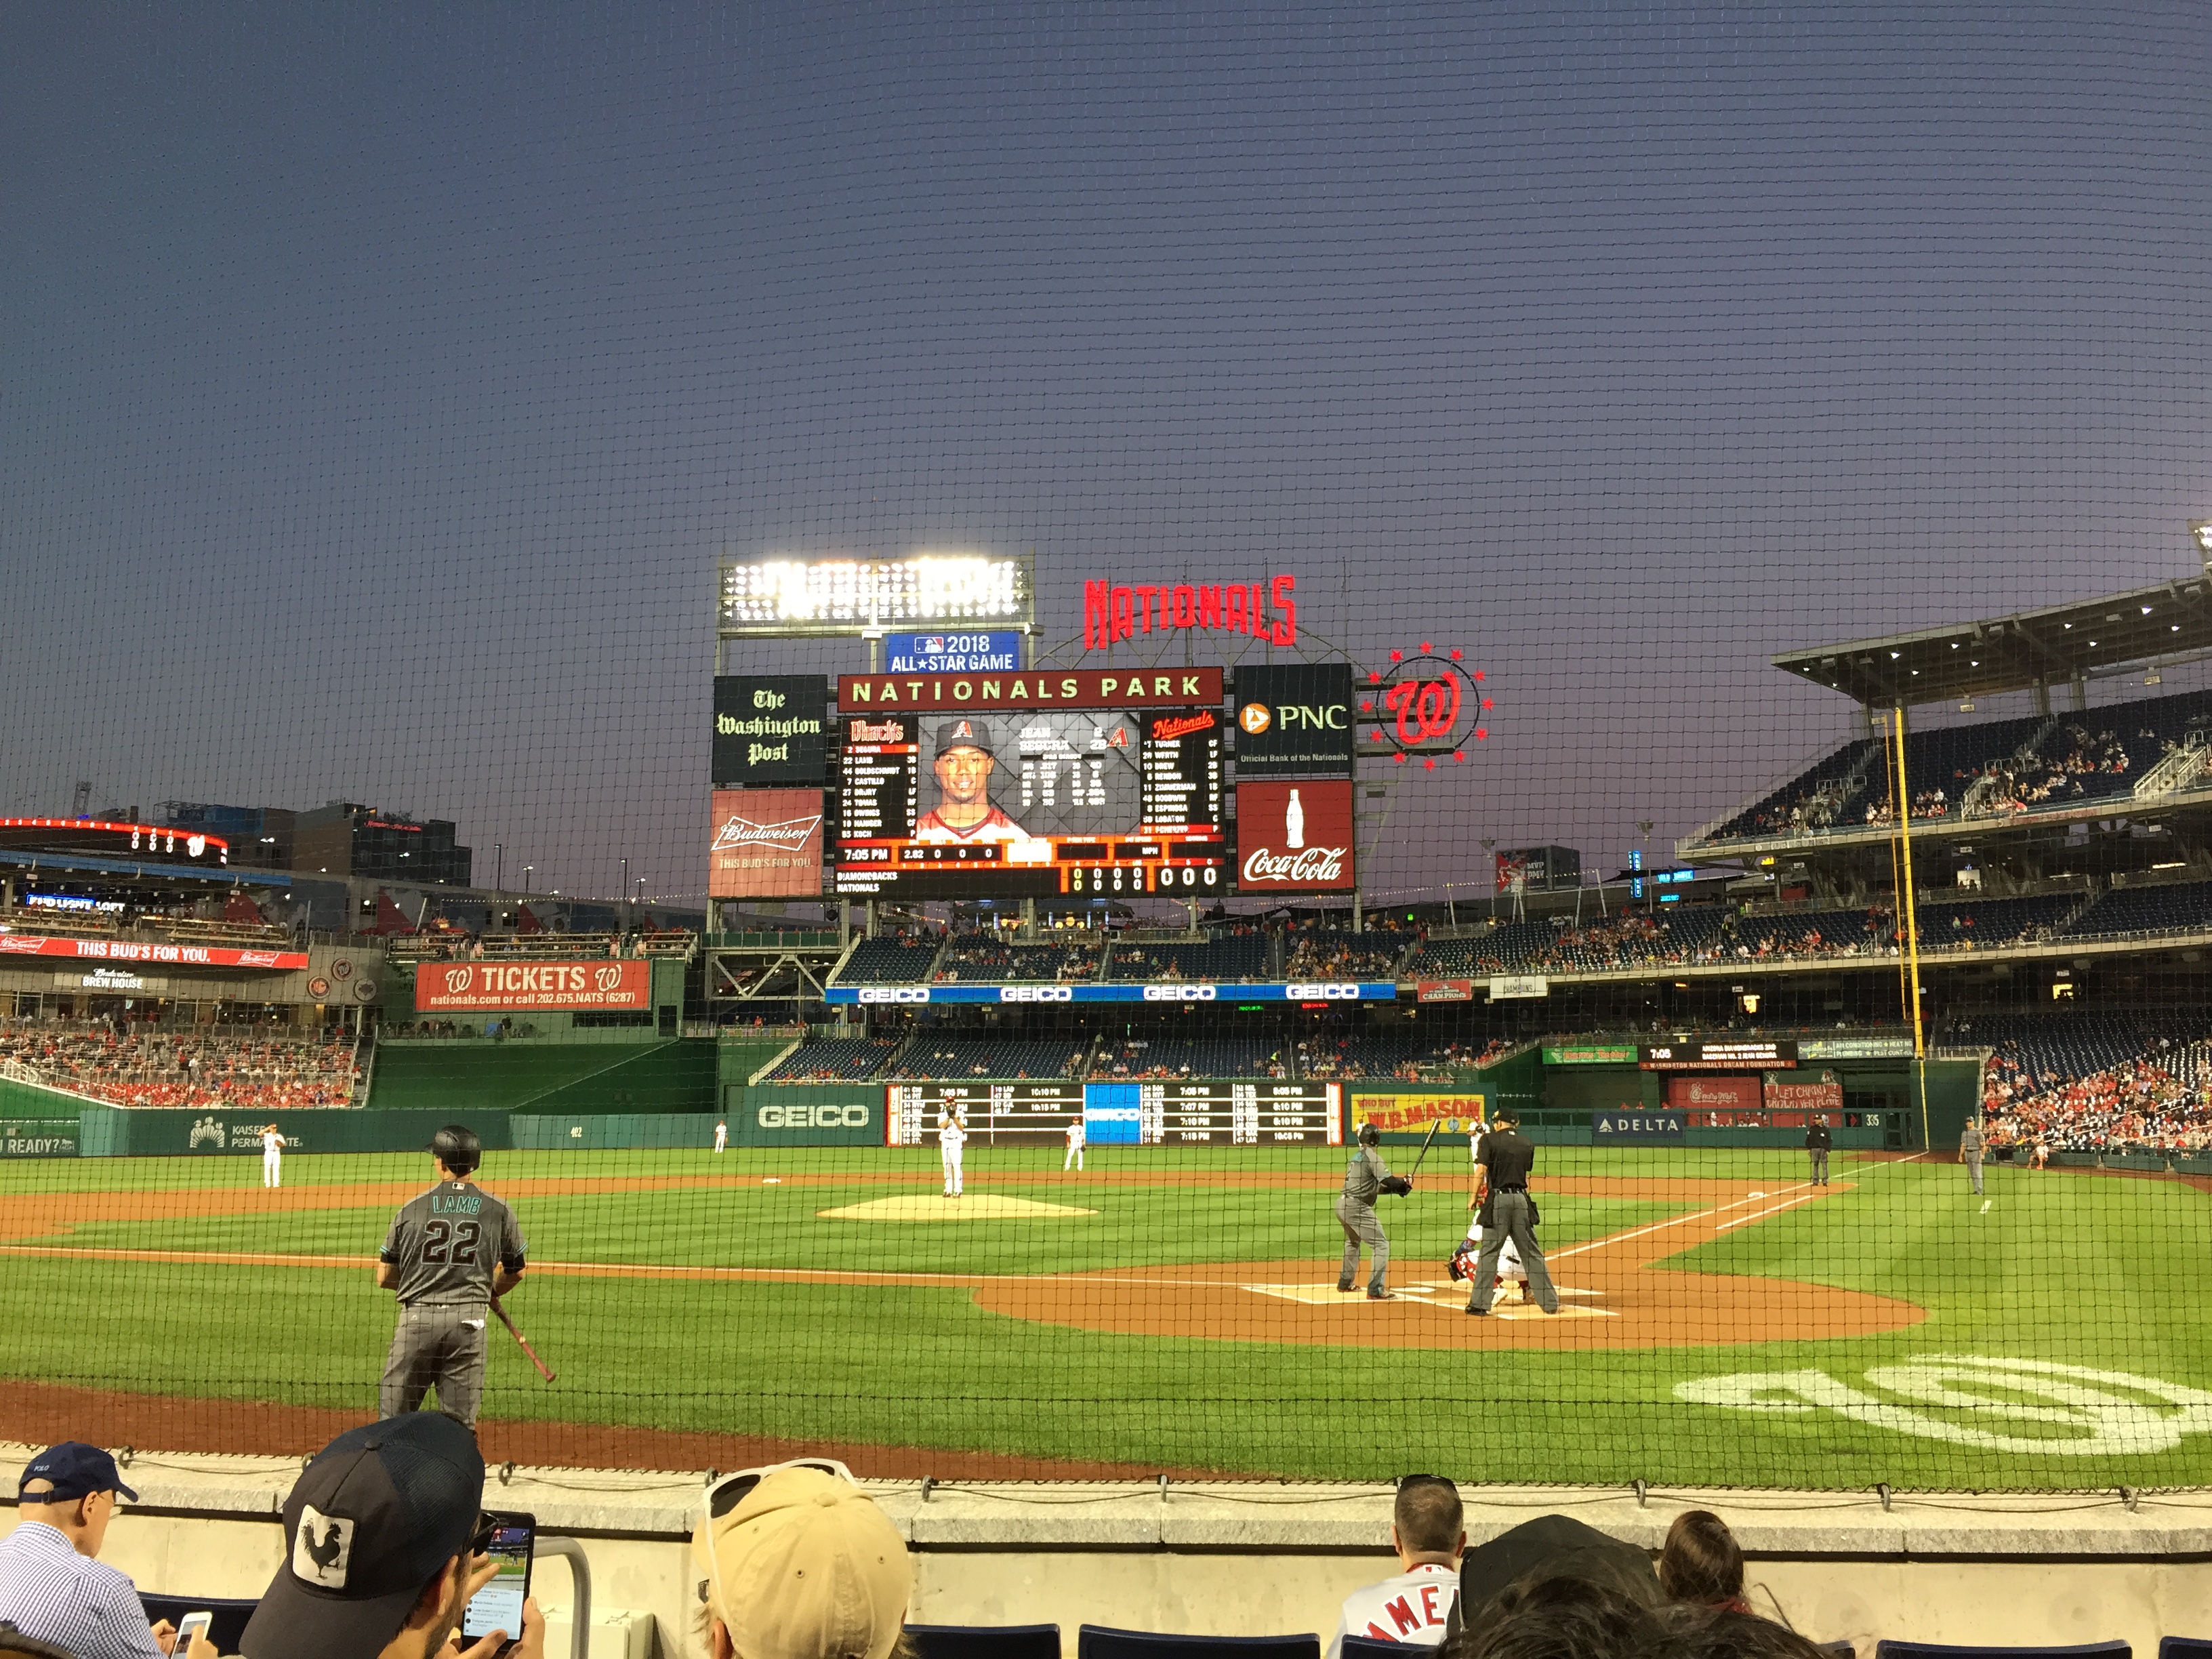 File:2016-09-27 19 05 44 View from the stands behind home plate during a  baseball game at Nationals Park in Washington, D.C..jpg - Wikimedia Commons